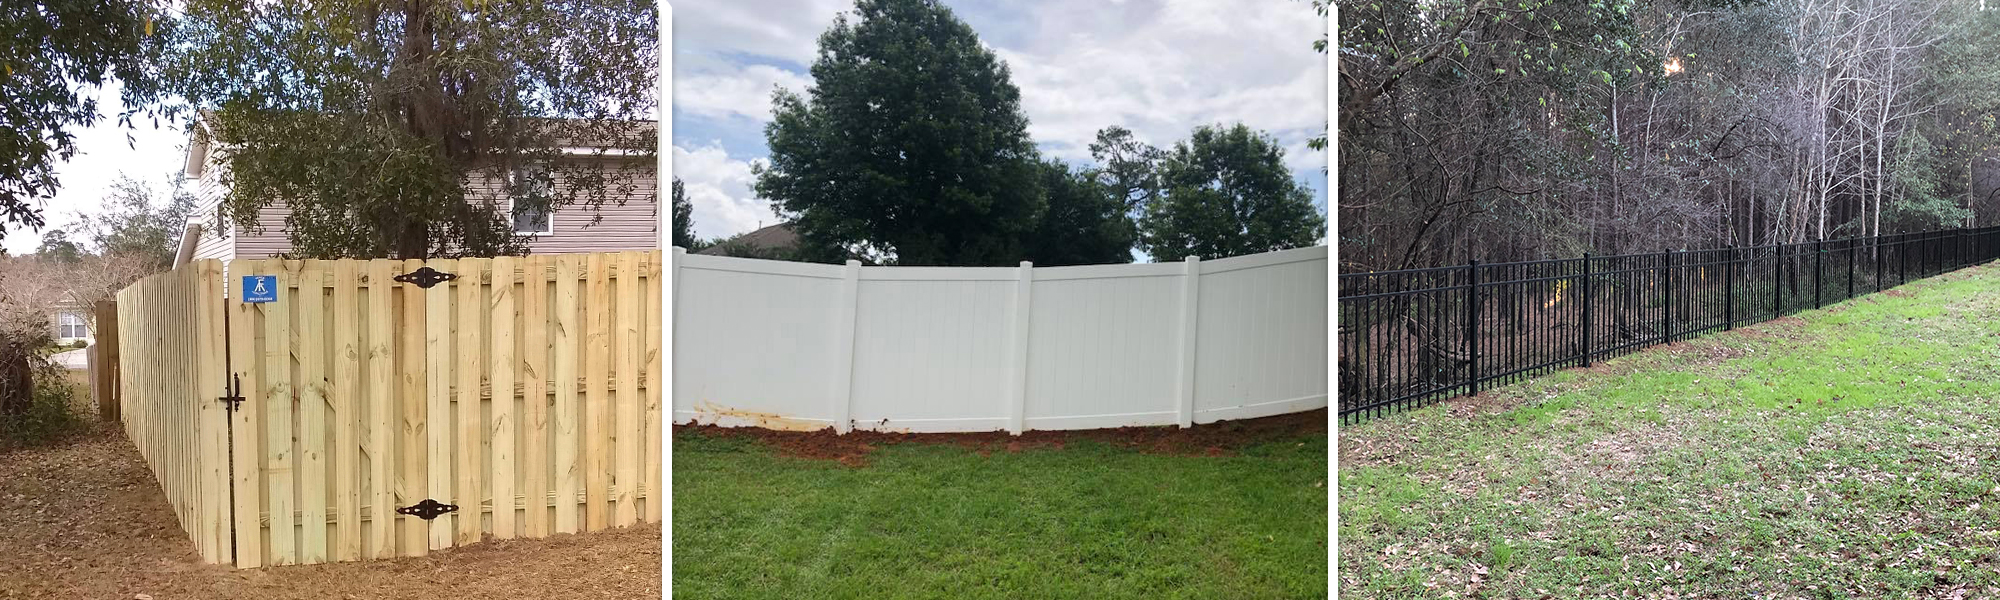 Fence Installation in Tallahassee, FL